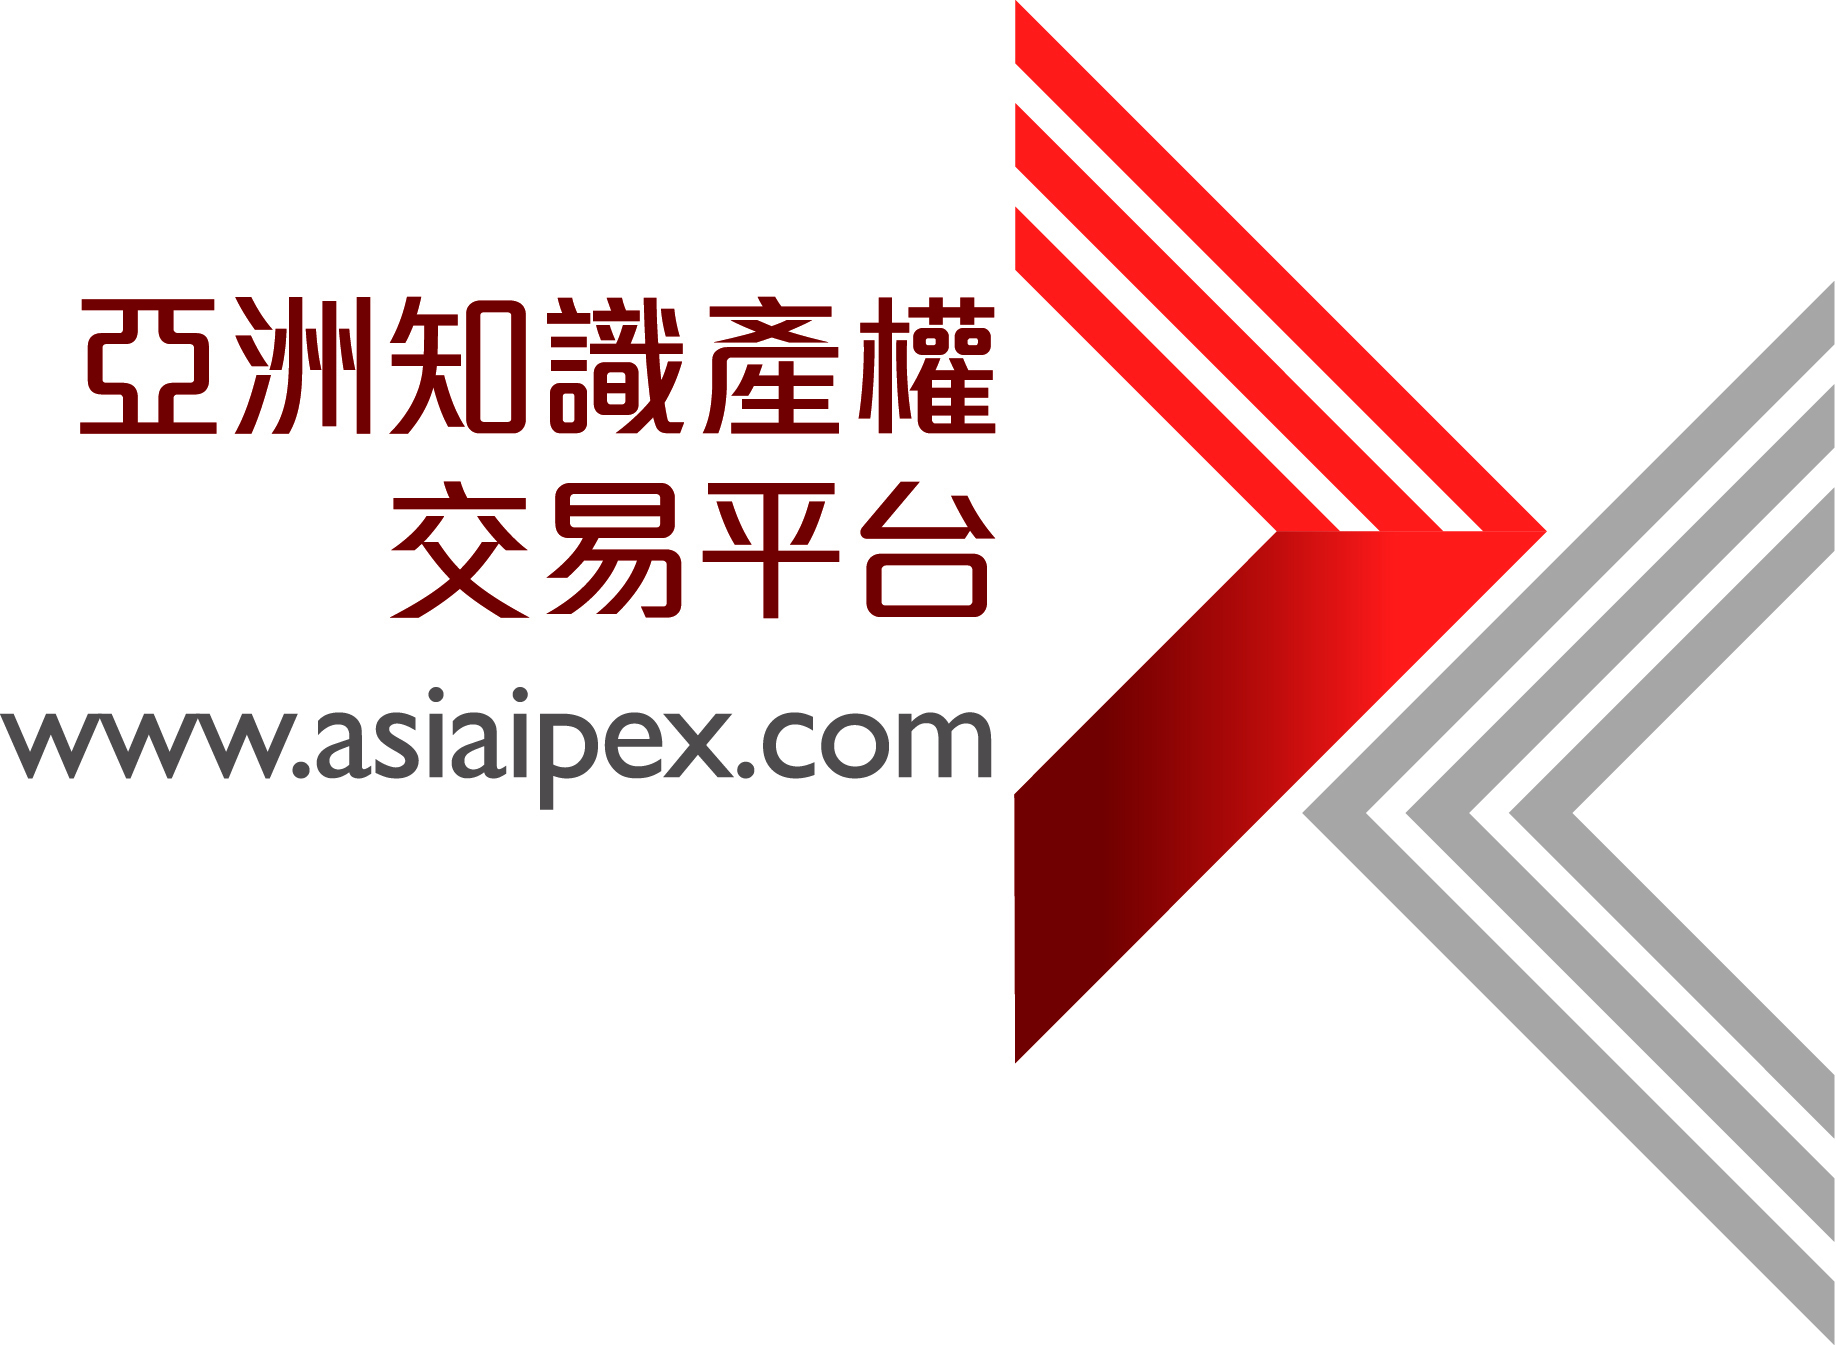 Asia IP Exchange (AsiaIPEX) -  FREE IP toolkit launched